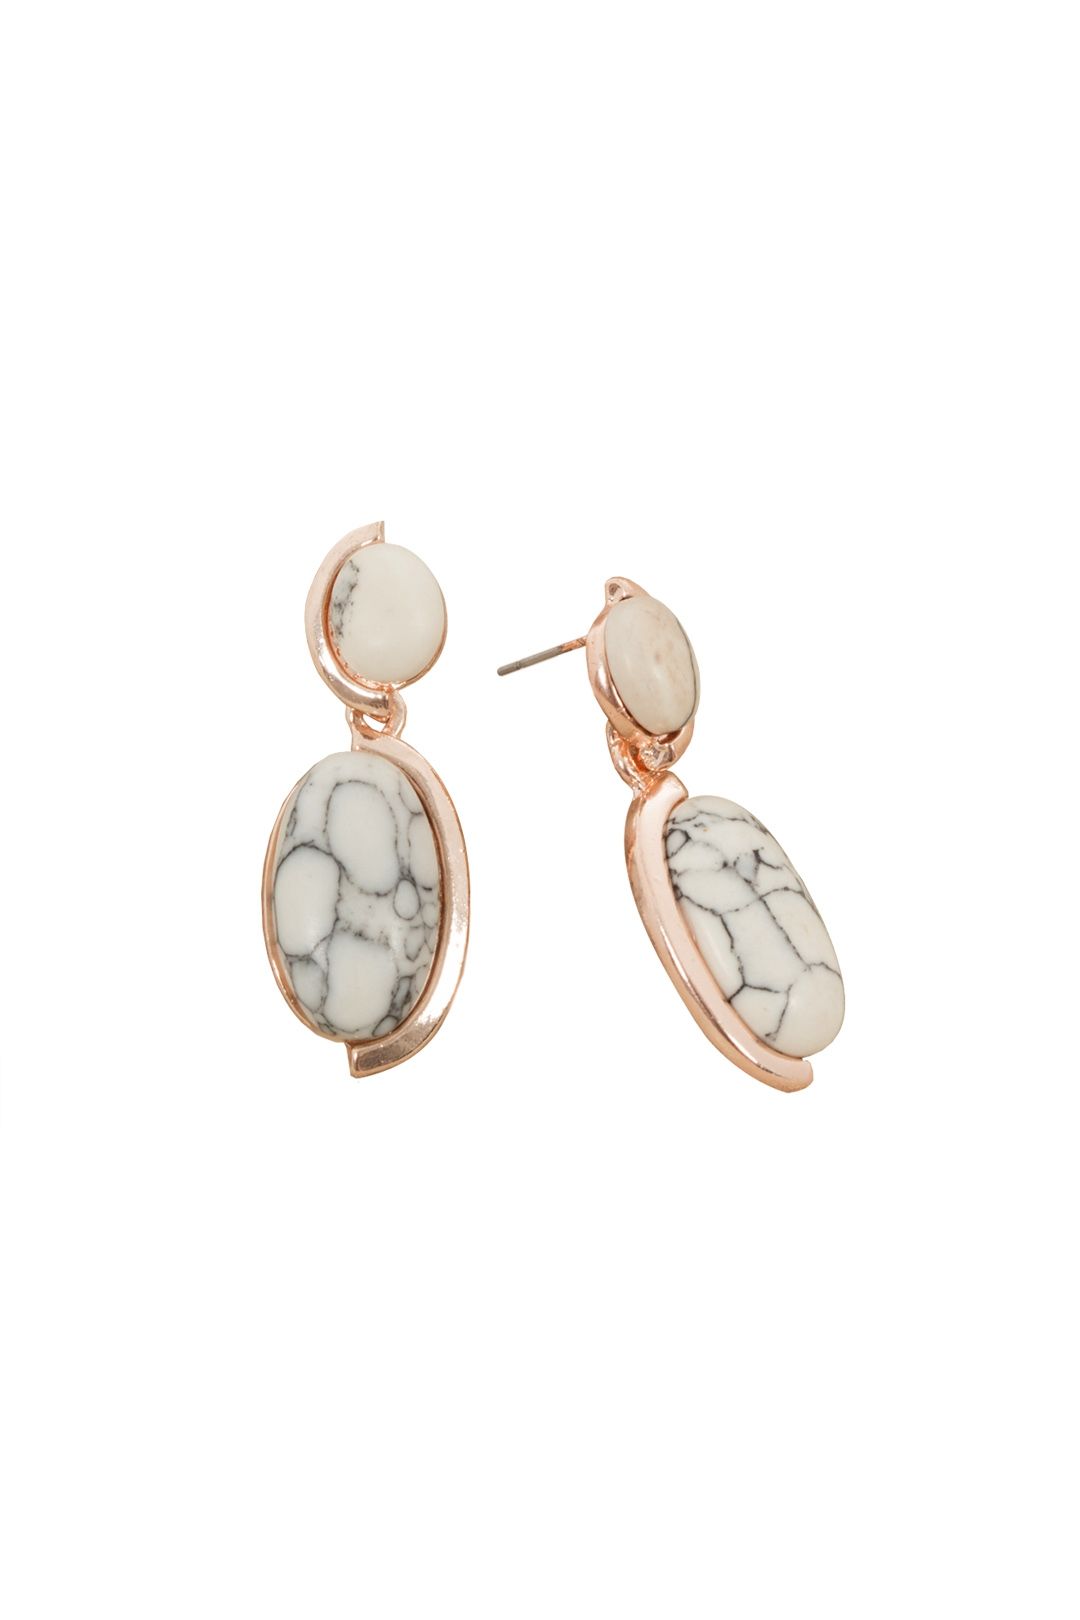 Adorne - Double Almond Drop Stone Stud Earring - Marble - Front